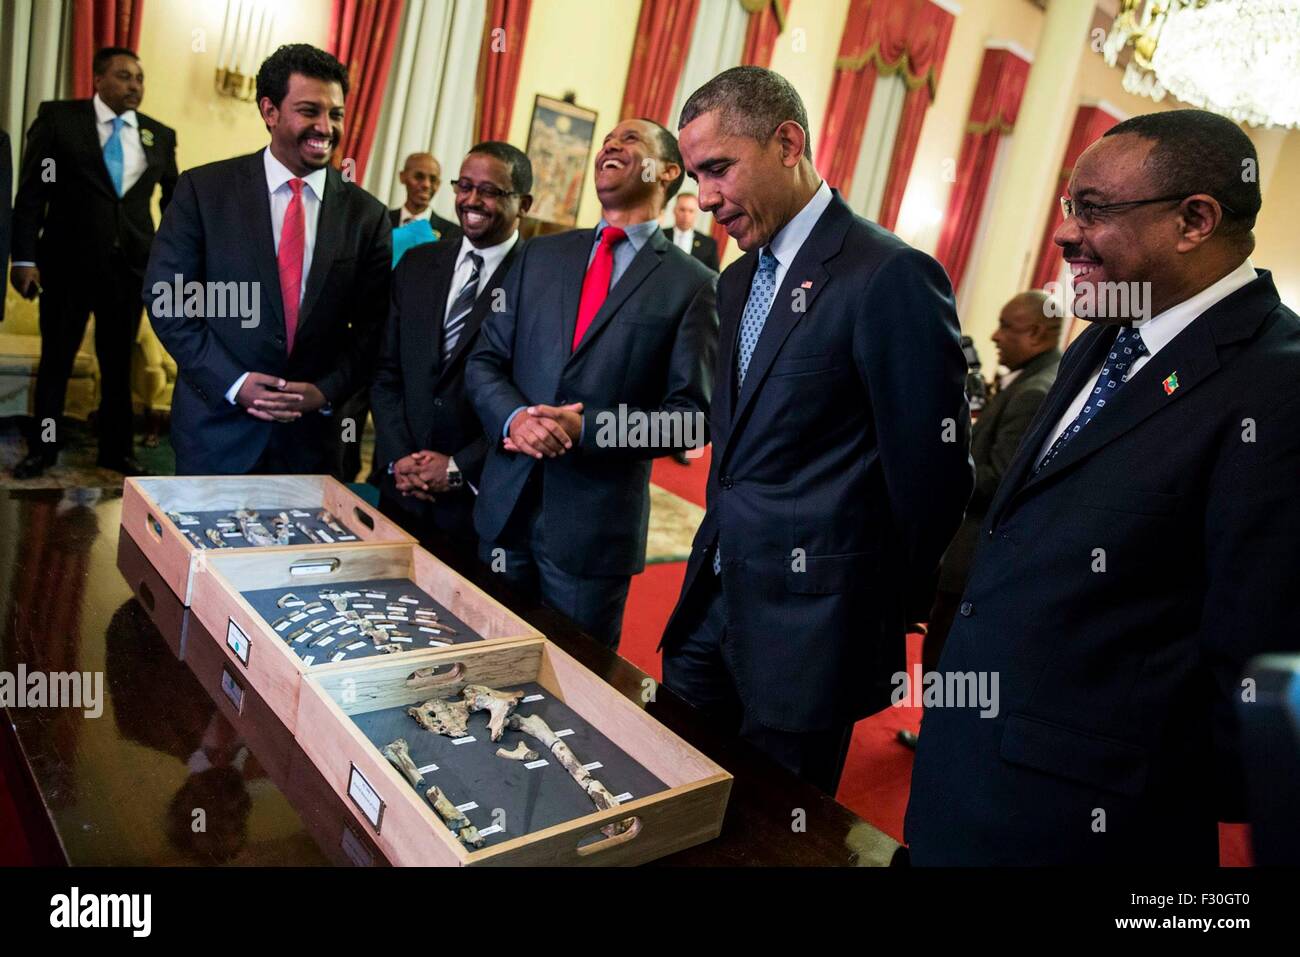 U.S. President Barack Obama and Ethiopia Prime Minister Hailemariam Desalegn view bone fragments belonging to "Lucy," the 3.2 million-year-old fossilized human ancestor as paleoanthropologist Zeresenay Alemseged explains the display at the National Palace July 27, 2015 in Addis Ababa, Ethiopia. Stock Photo